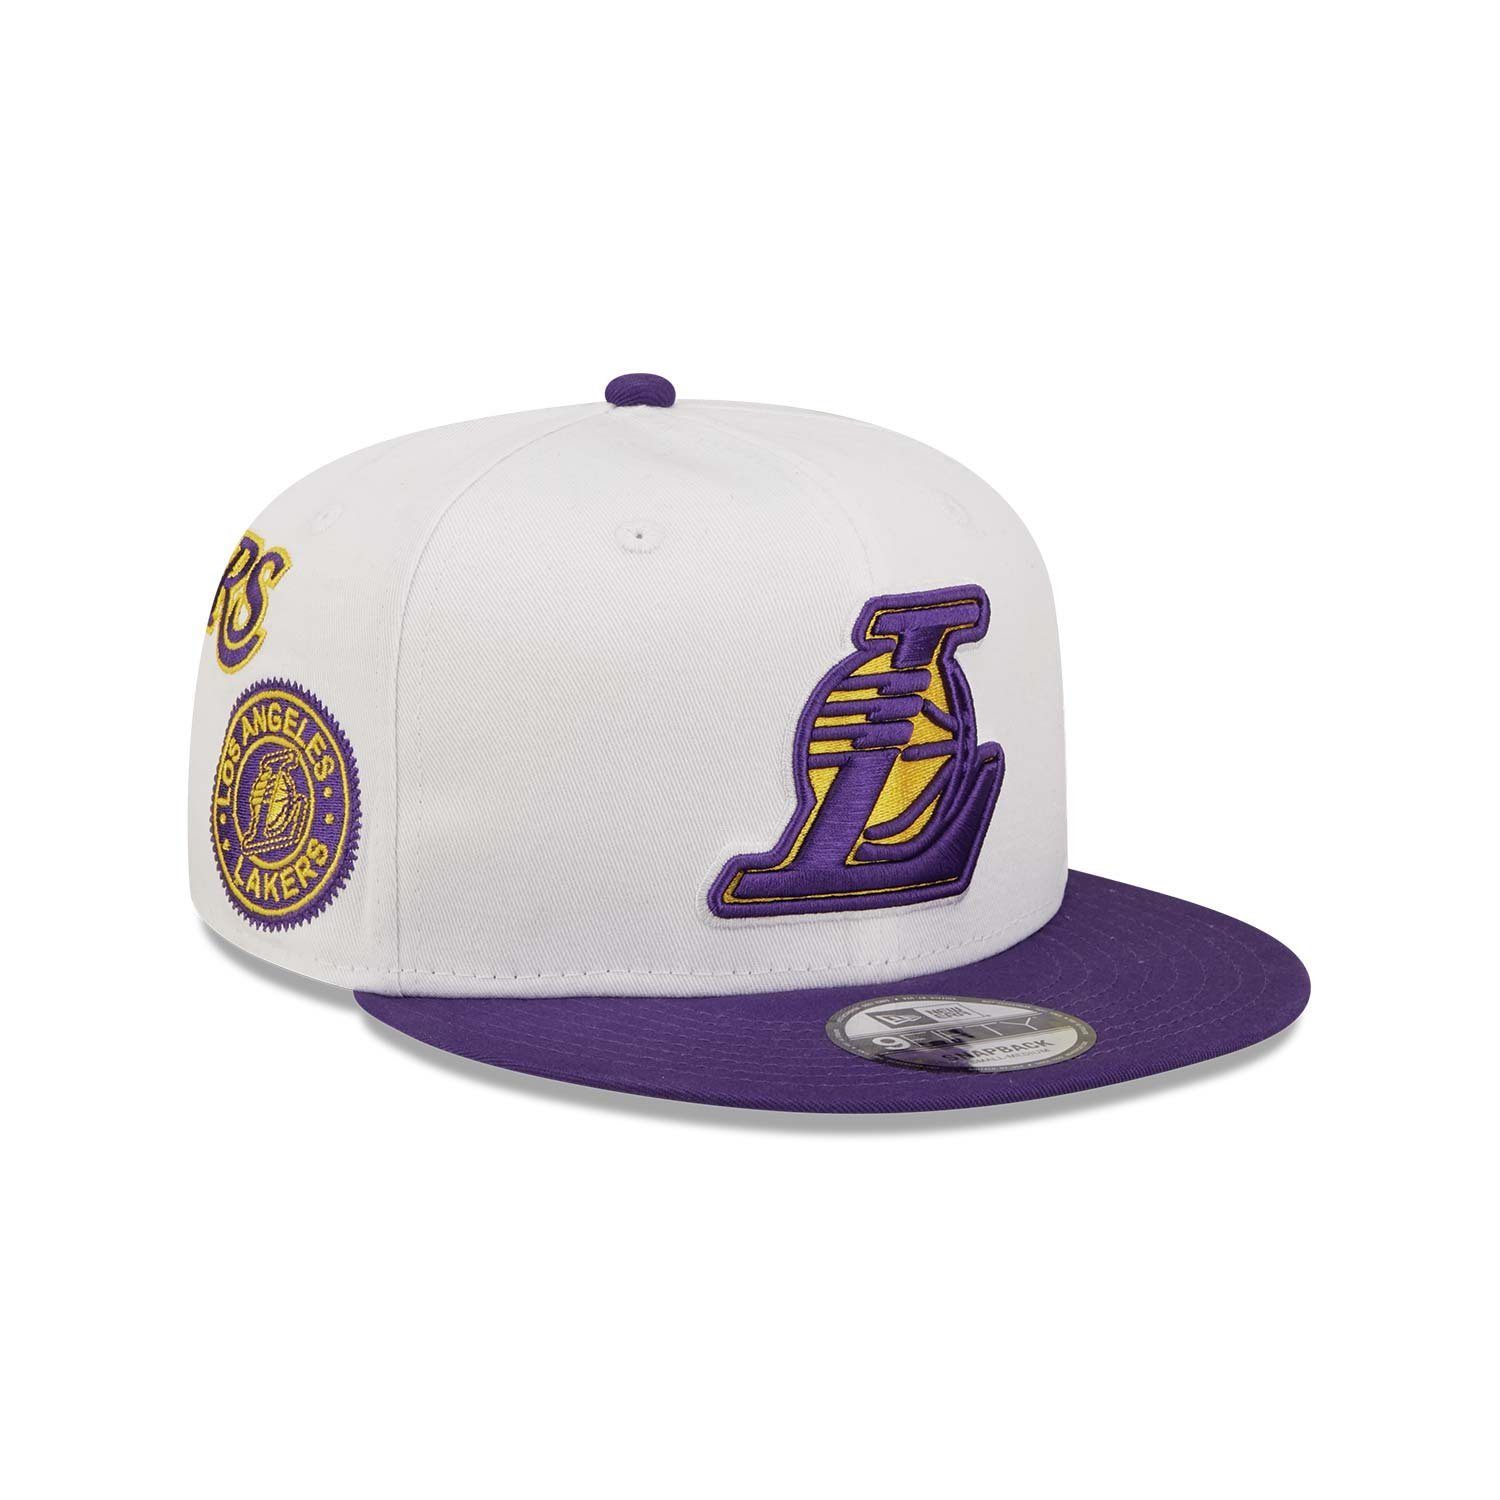 New Era Snapback Cap 9FIFTY All Over Patches Los Angeles Lakers